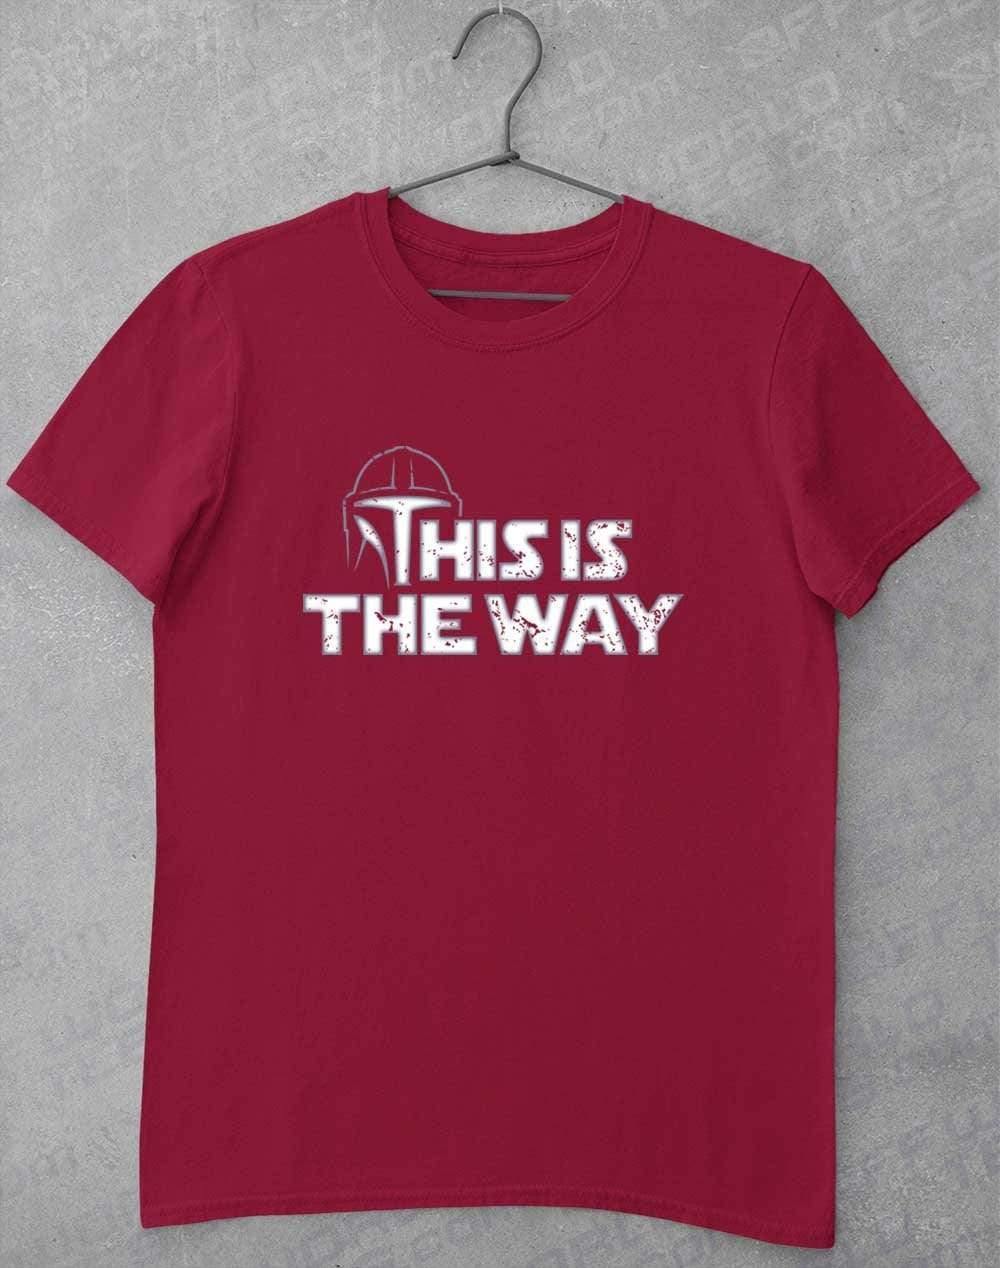 This is the Way - T-Shirt S / Cardinal Red  - Off World Tees